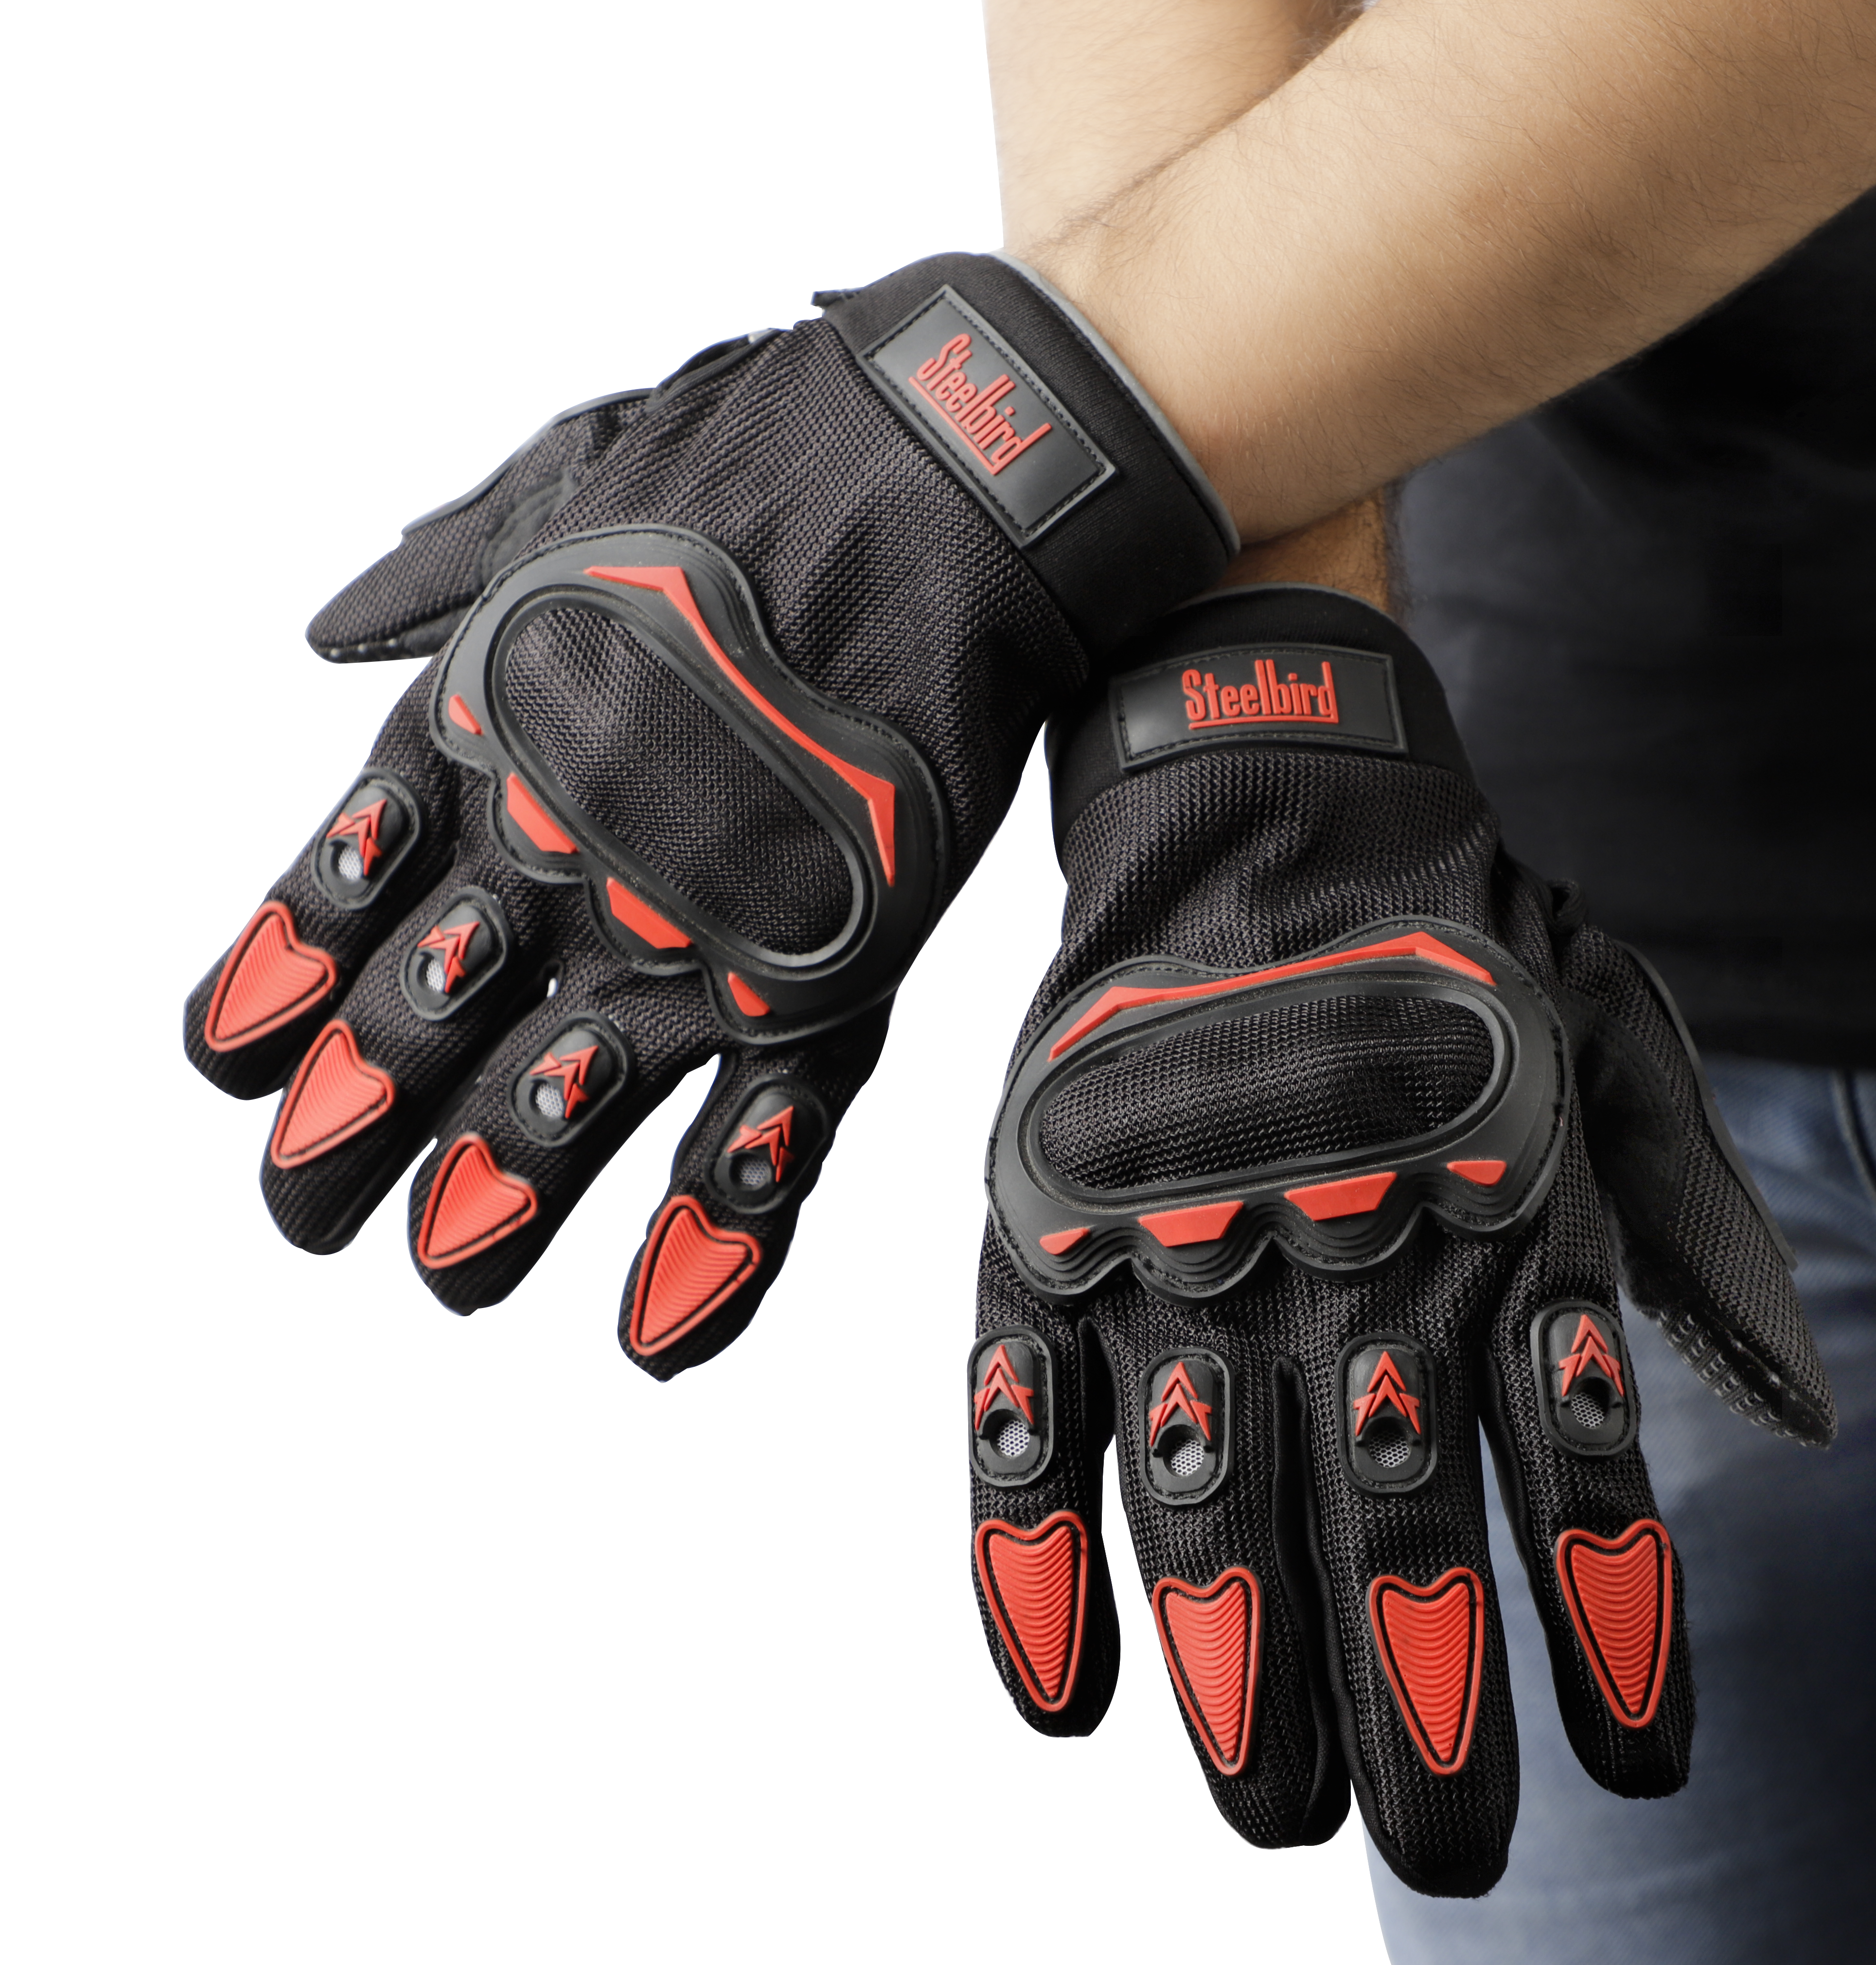 Steelbird Full Finger Bike Riding Gloves With Touch Screen Sensitivity At Thumb And Index Finger, Protective Off-Road Motorbike Racing (Red)